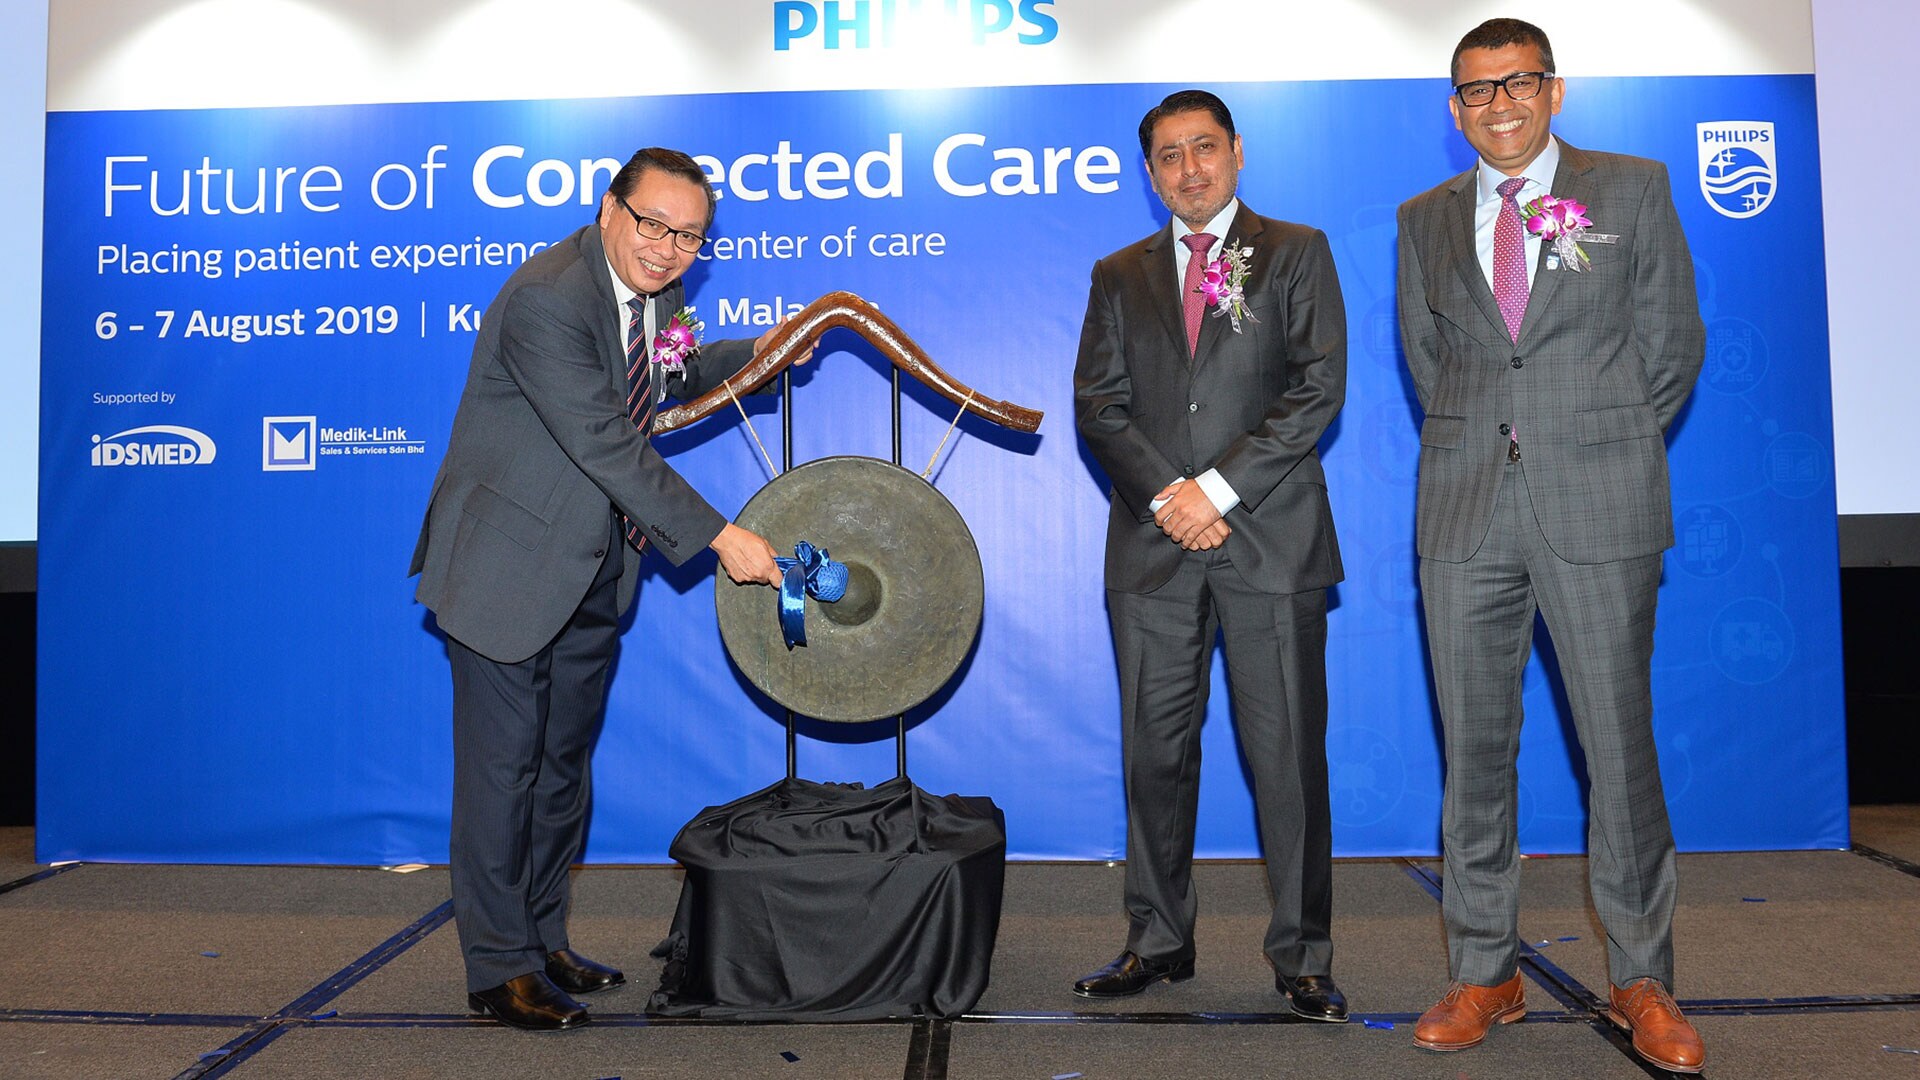 Download image (.jpg) philips future of connected care symposium 2019 (opens in a new window)